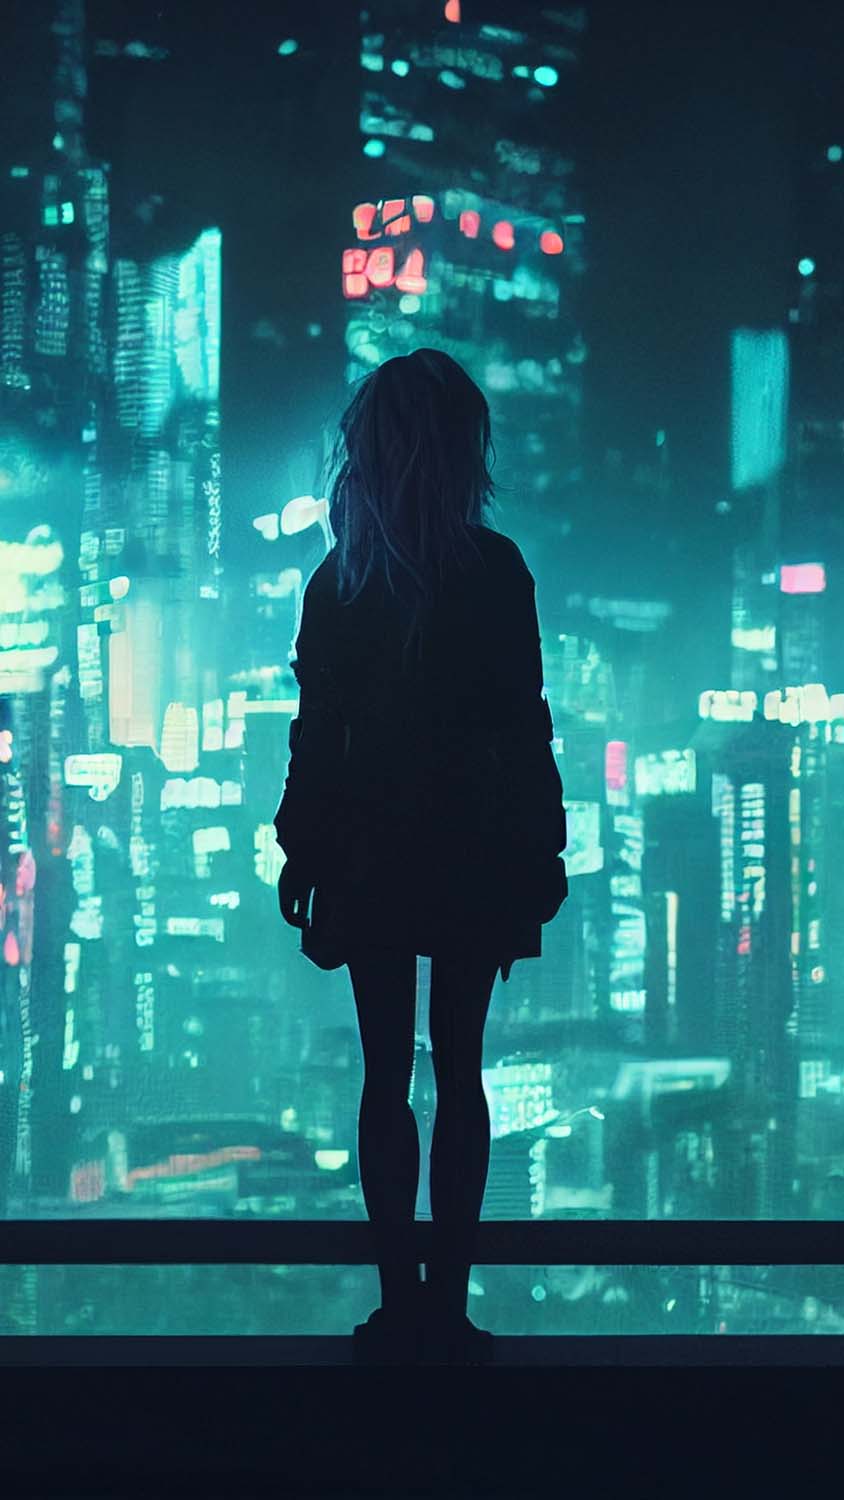 Alone Girl IPhone Wallpaper HD - IPhone Wallpapers : iPhone Wallpapers